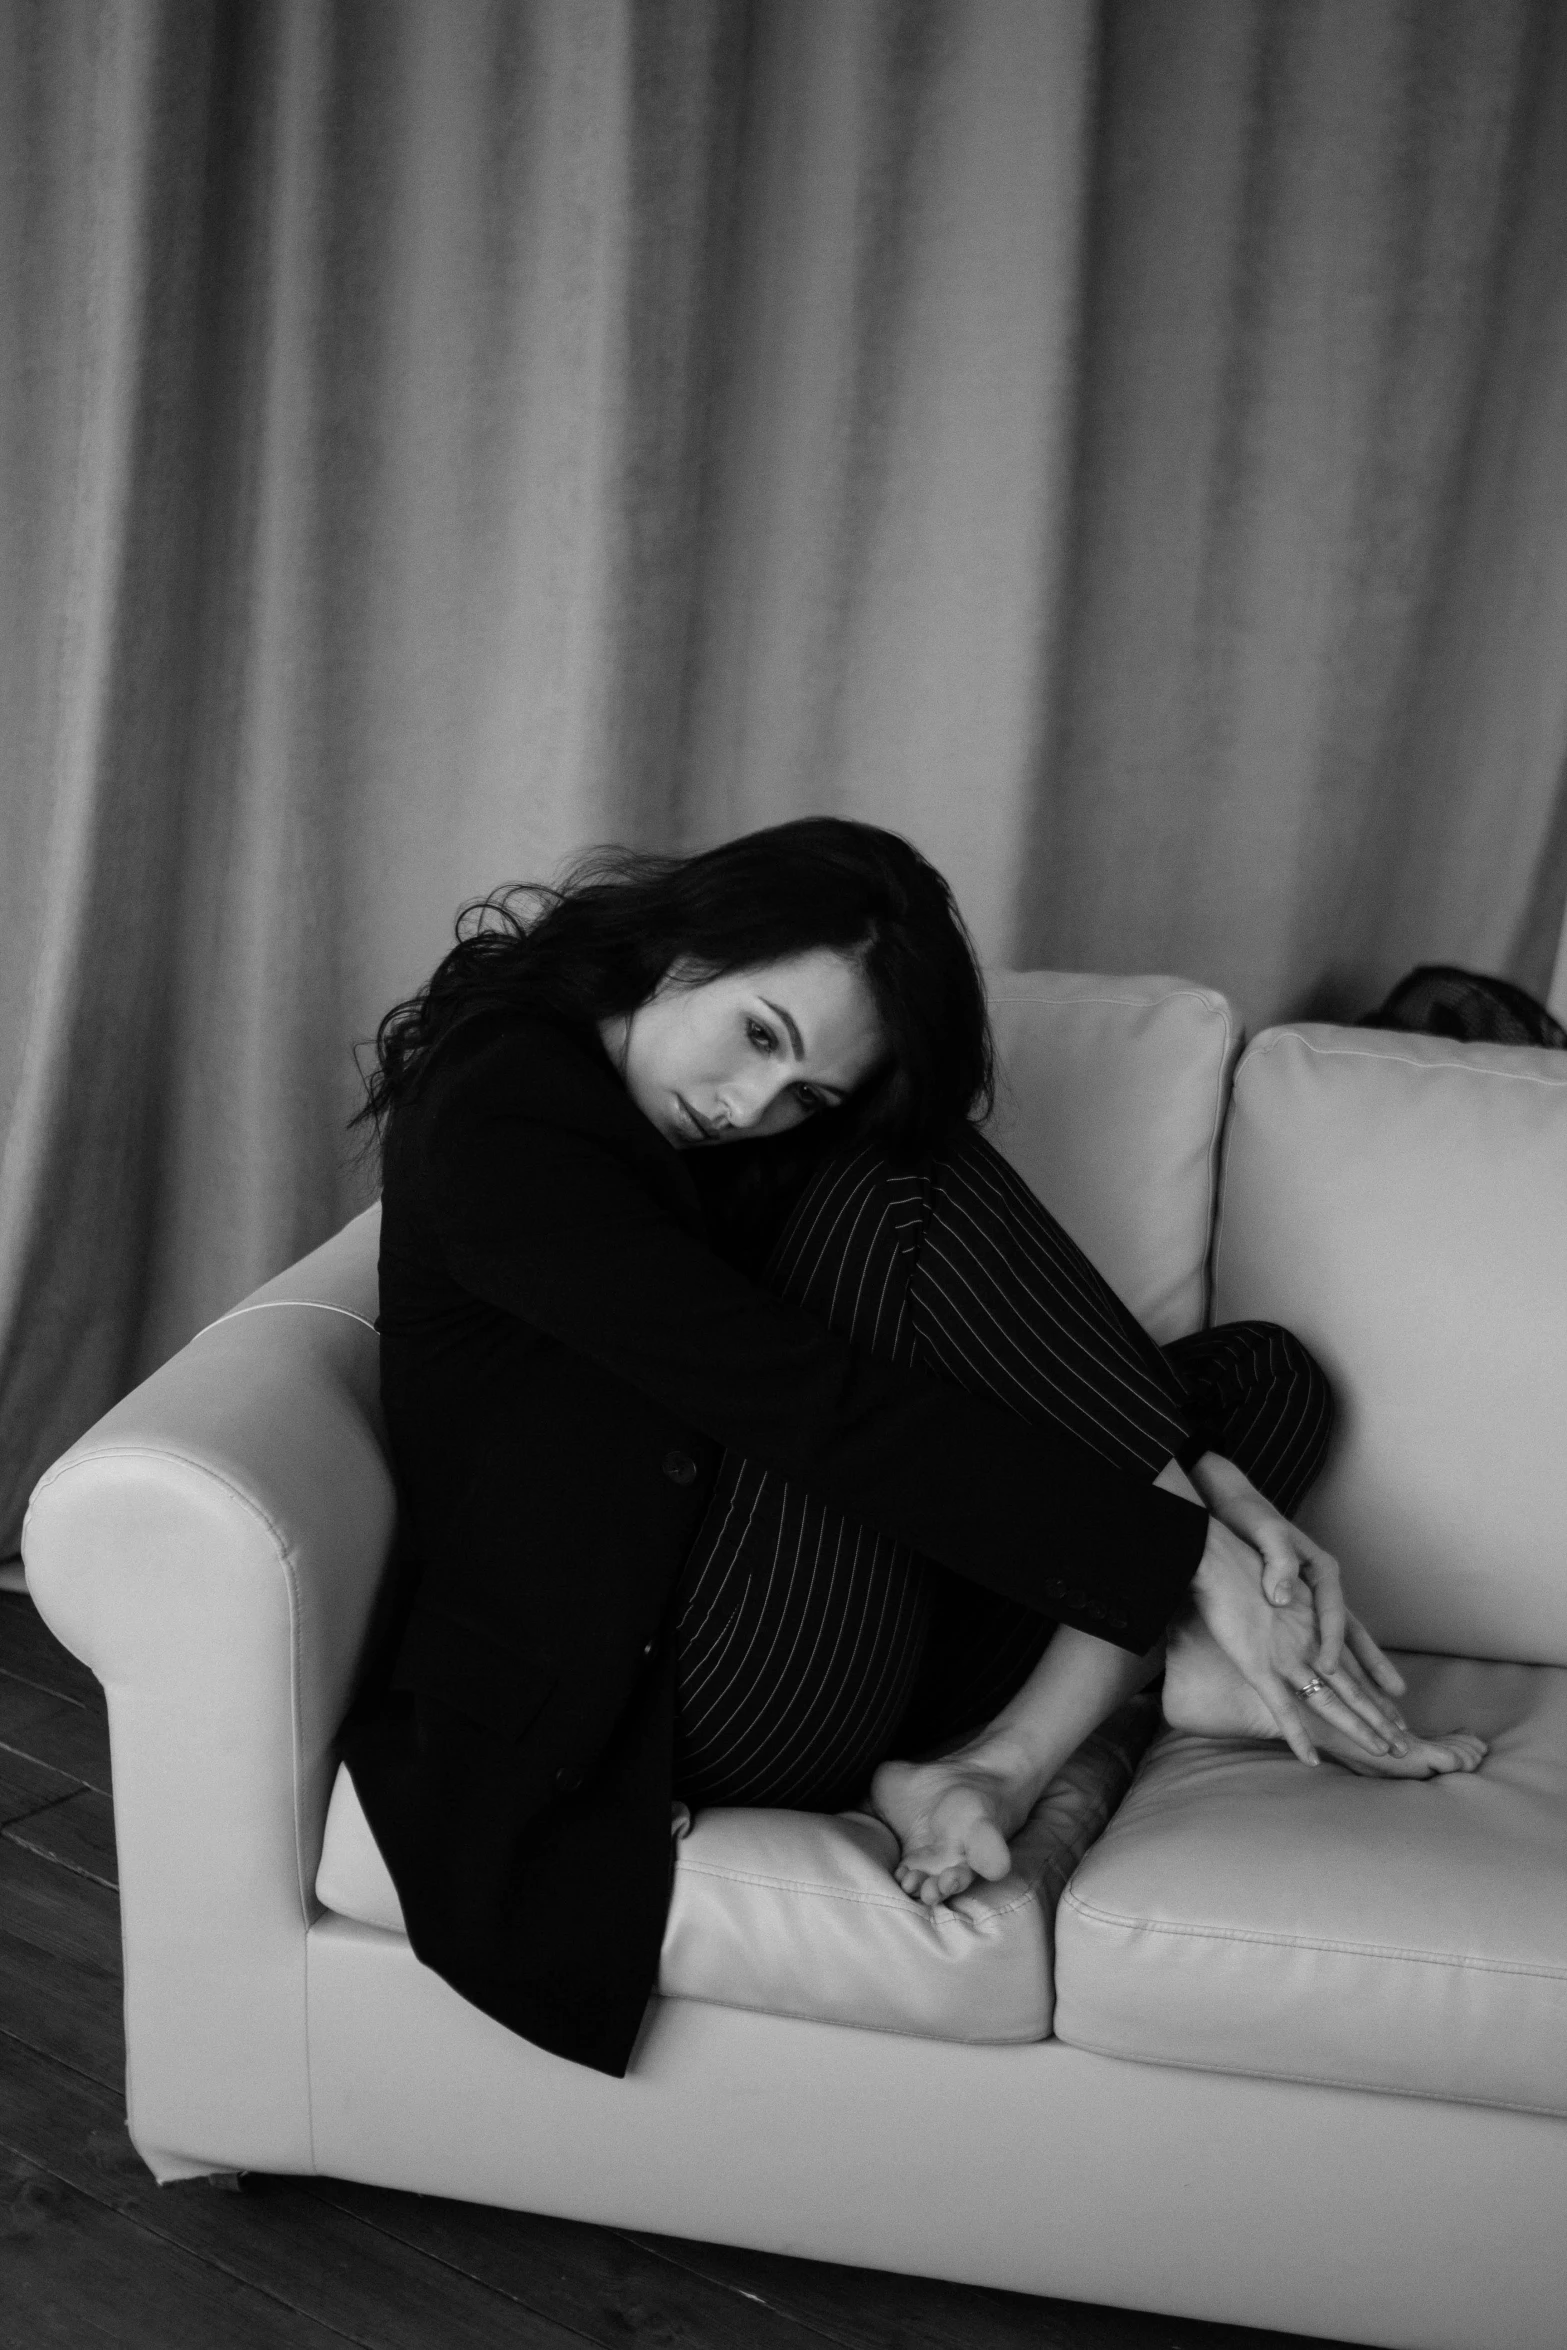 a black and white pograph of a person sitting on a couch